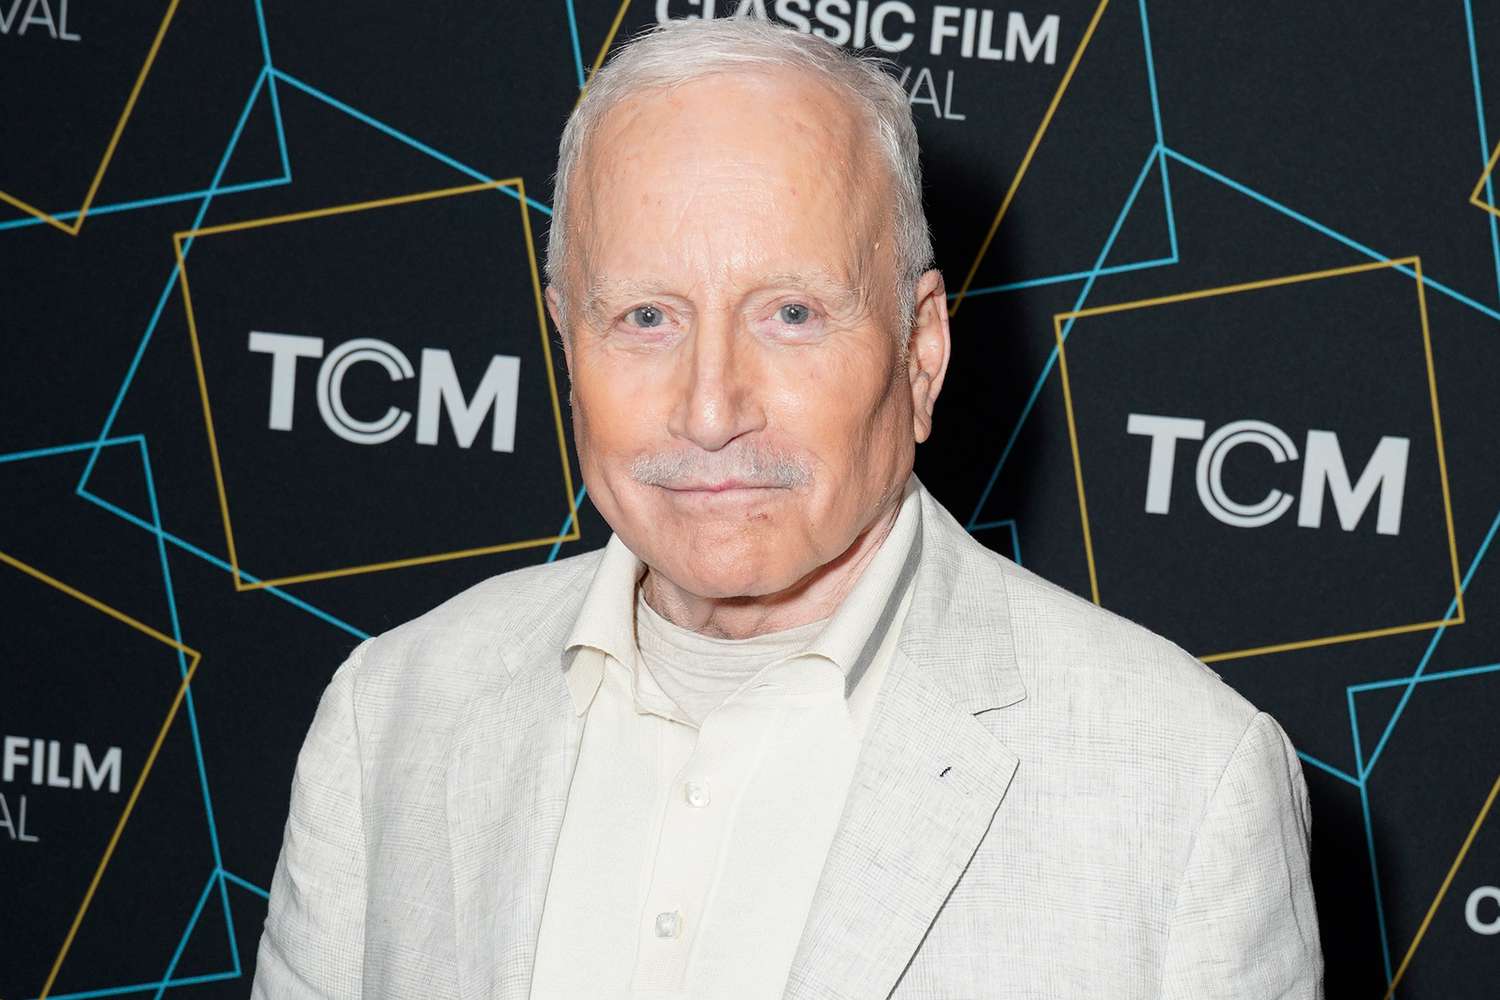 Richard Dreyfuss causes theater walkout with reportedly misogynistic comments at 'Jaws' screening